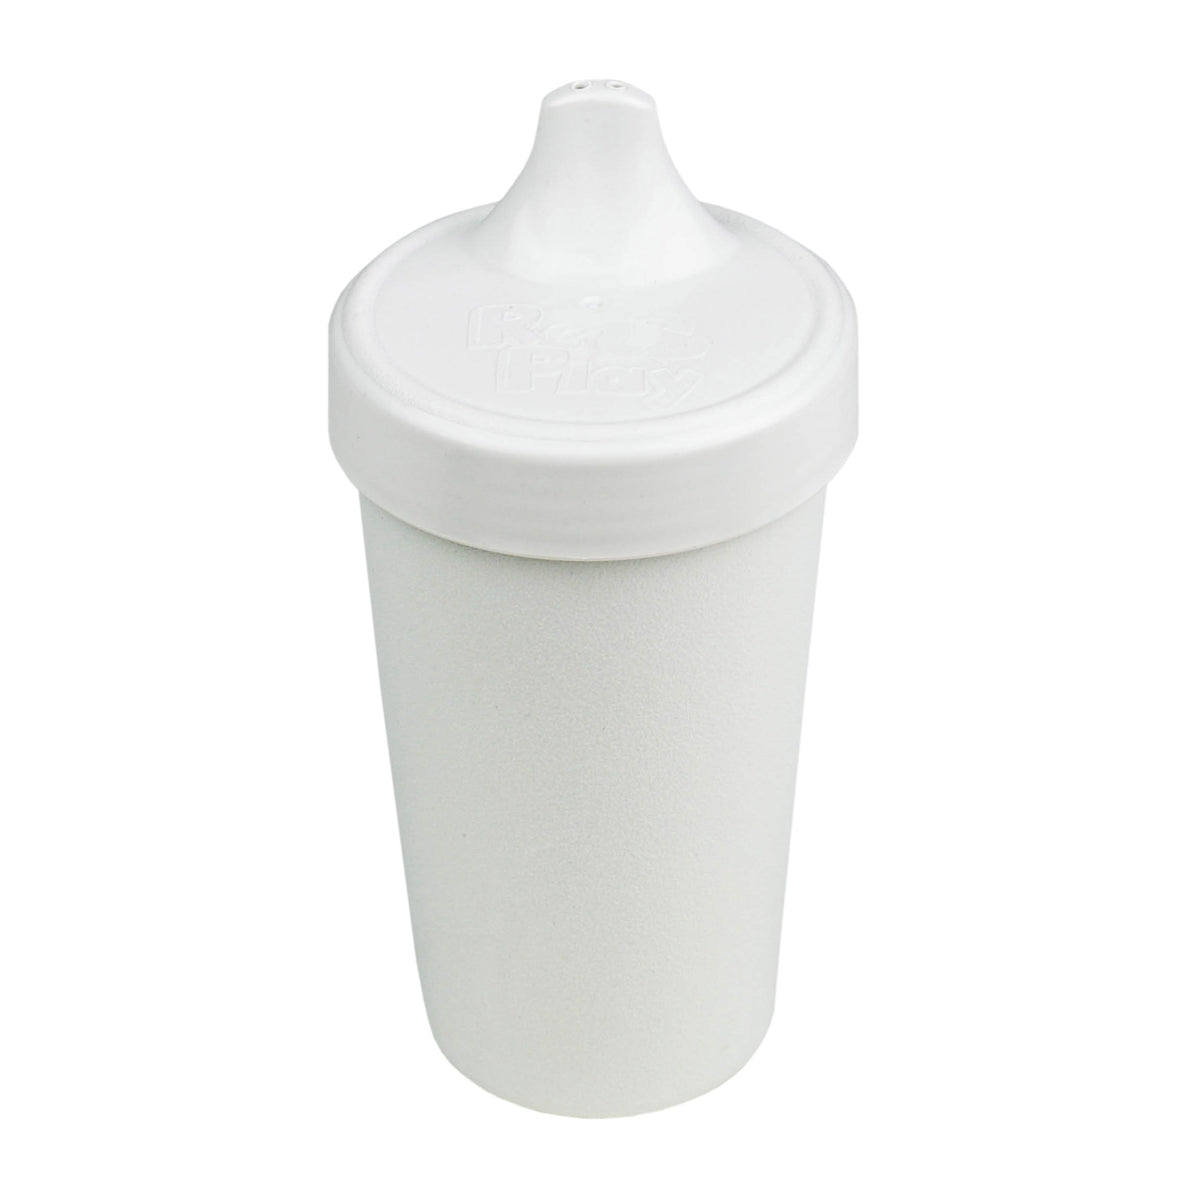 https://sweetteacaviar.com/cdn/shop/products/White_Blue_Sippy_Cup.jpg?v=1541193994&width=1200